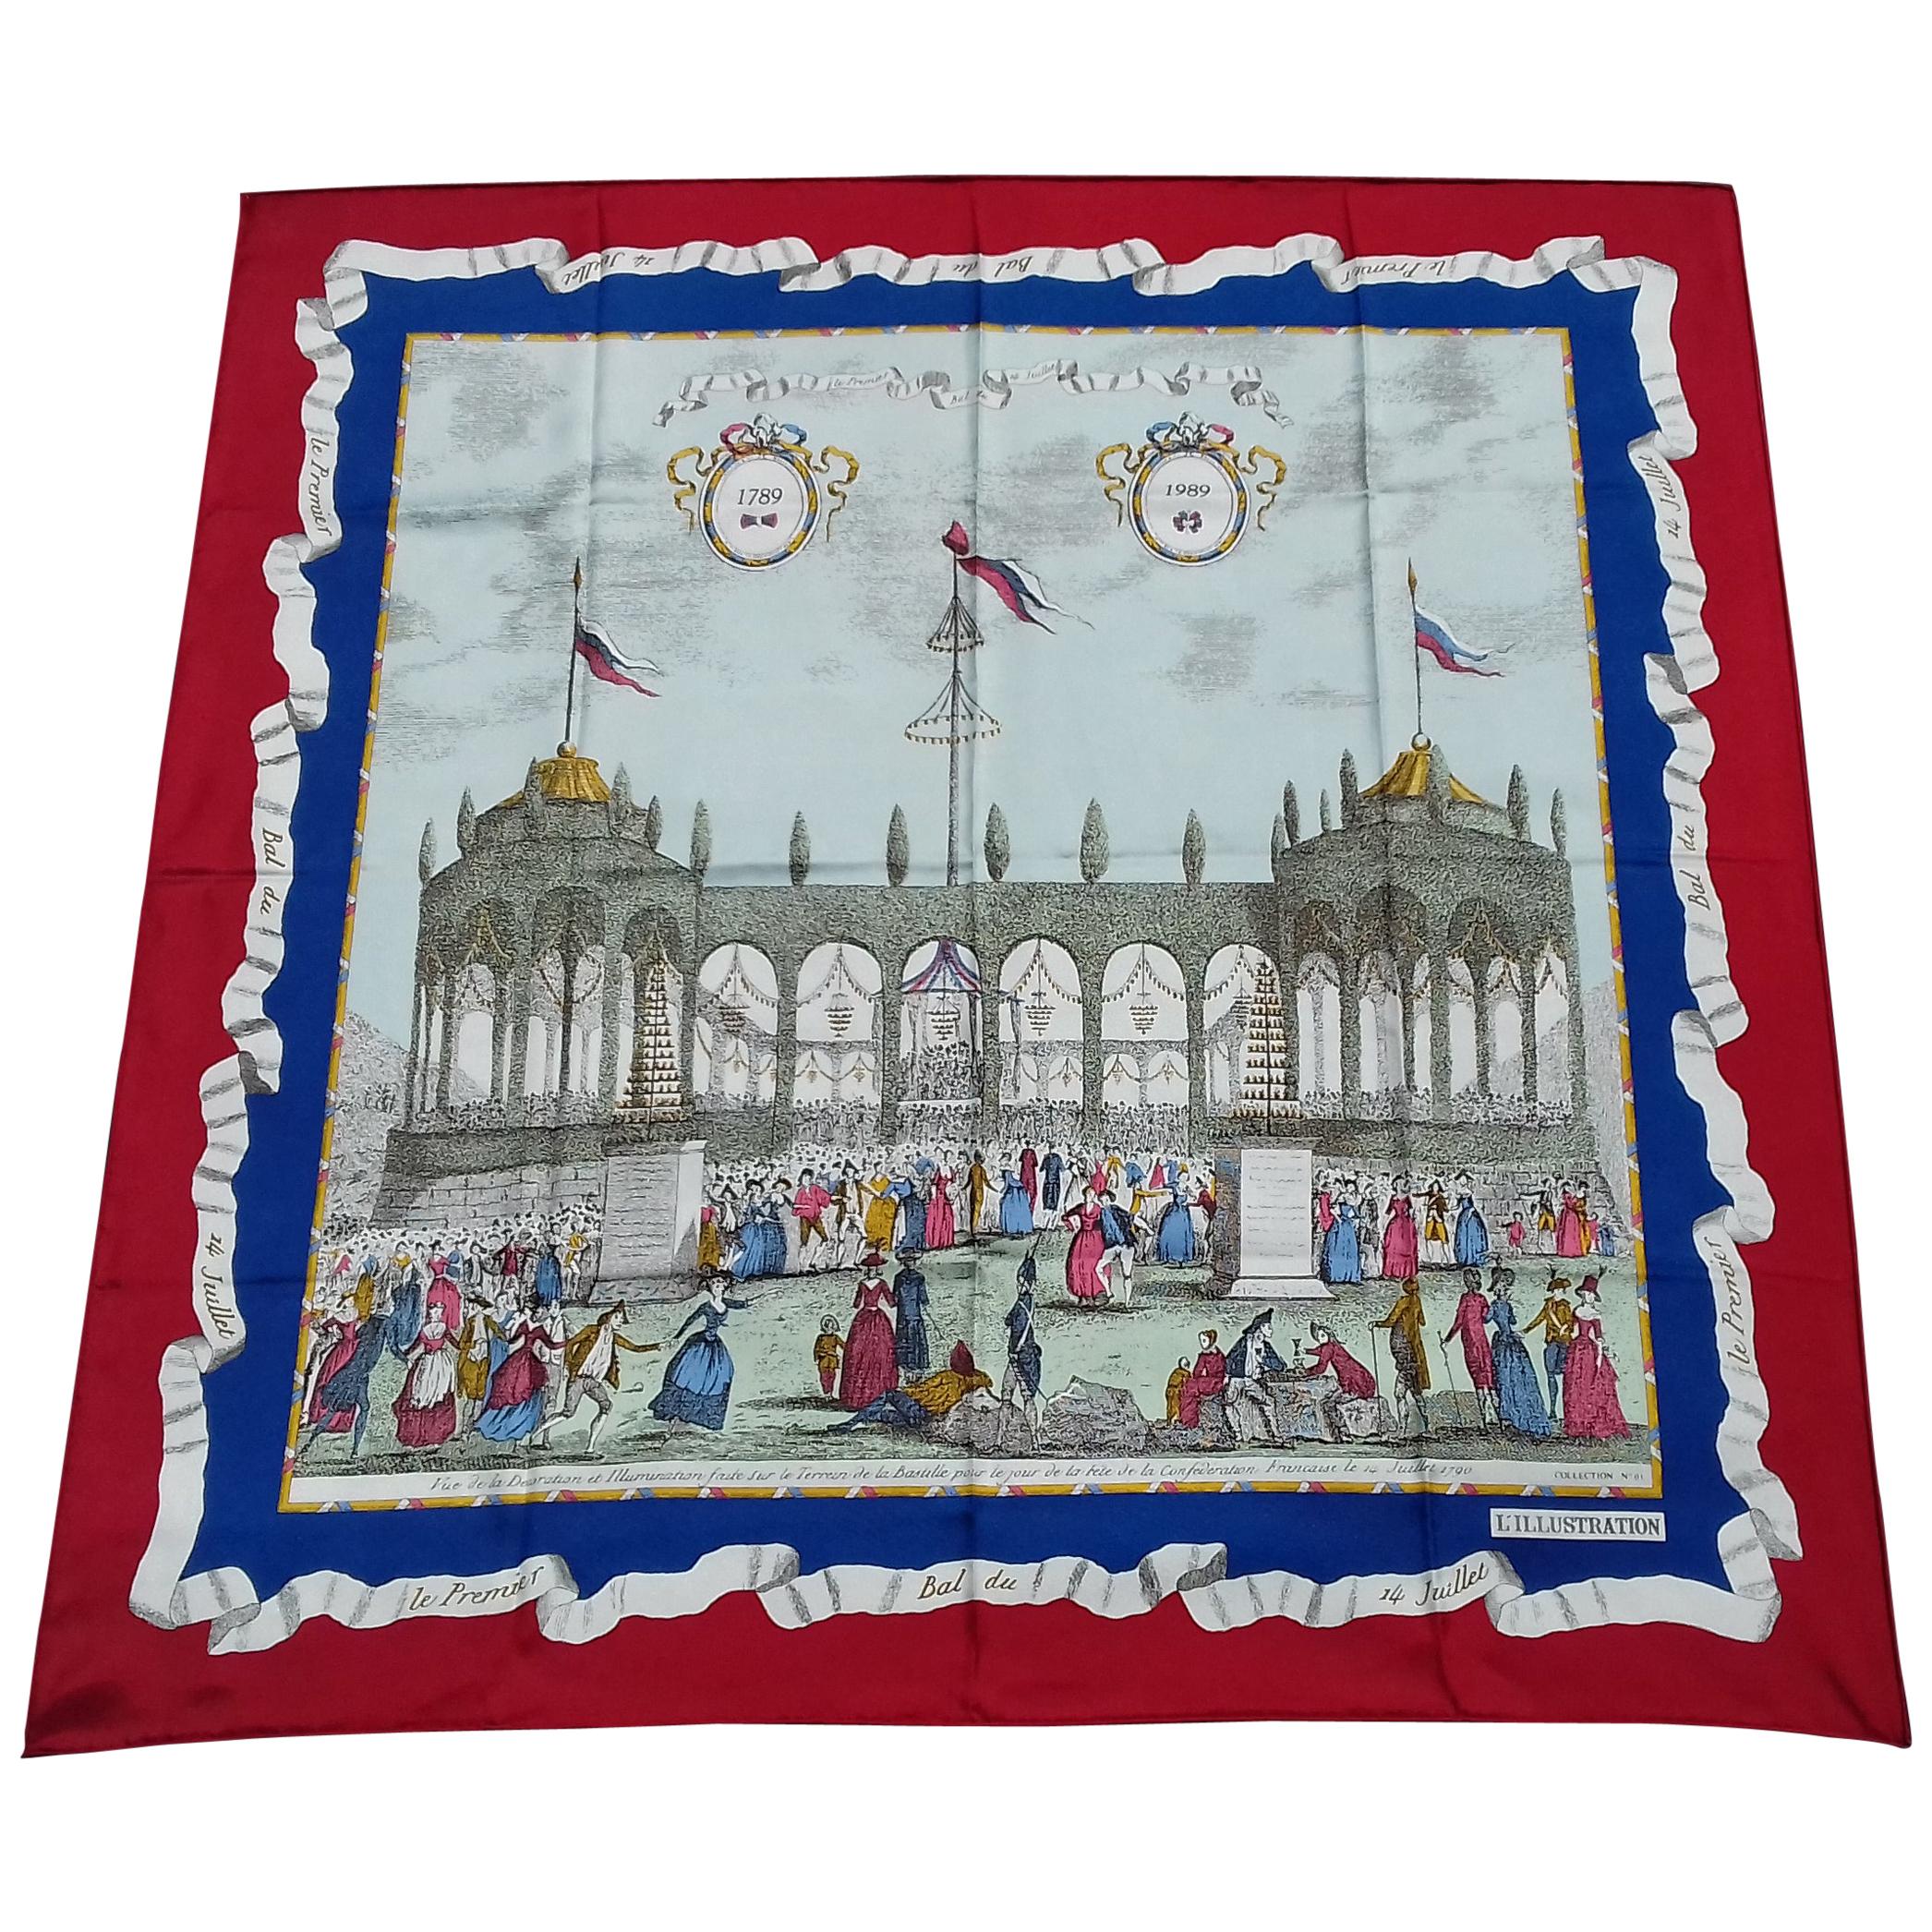 Silk Scarf The First Ball of July 14 Bicentenary of the French Revolution 34 inc